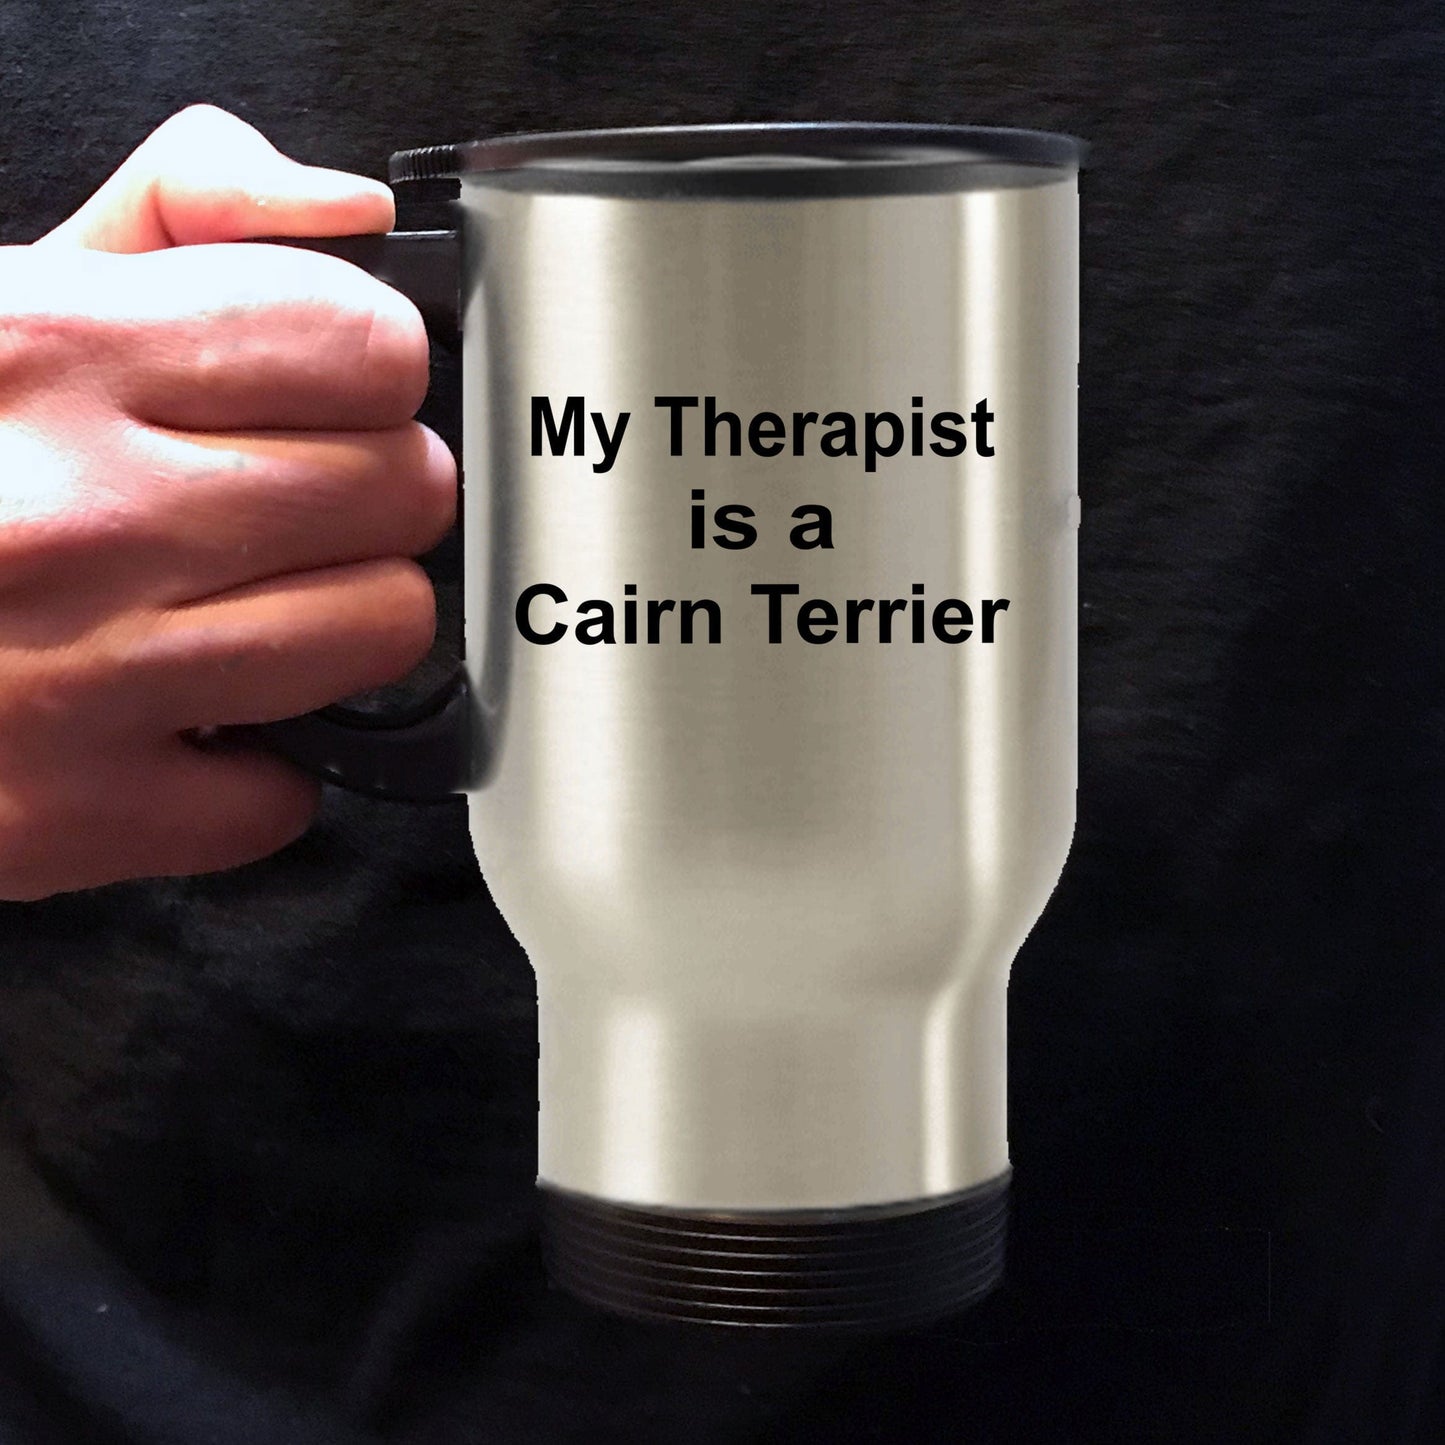 Cairn Terrier Dog Owner Lover Funny Gift Therapist Stainless Steel Insulated Travel Coffee Mug